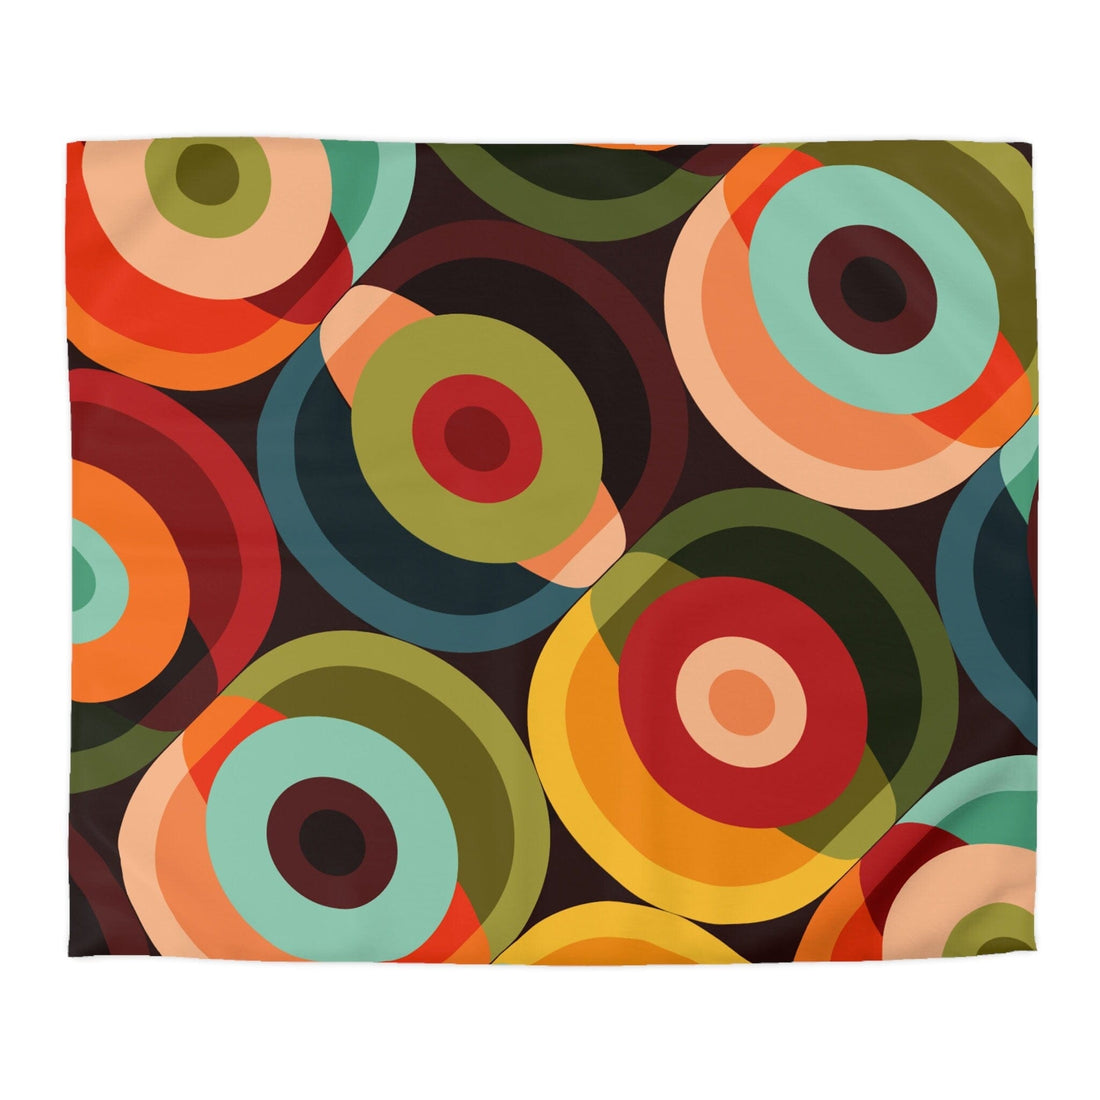 Kate McEnroe New York Retro Groovy Geometric Circle Orbs Duvet Cover, 70s Mid Century Modern Psychedelic Abstract Bedding - 132582823Duvet Covers98964528130970245940